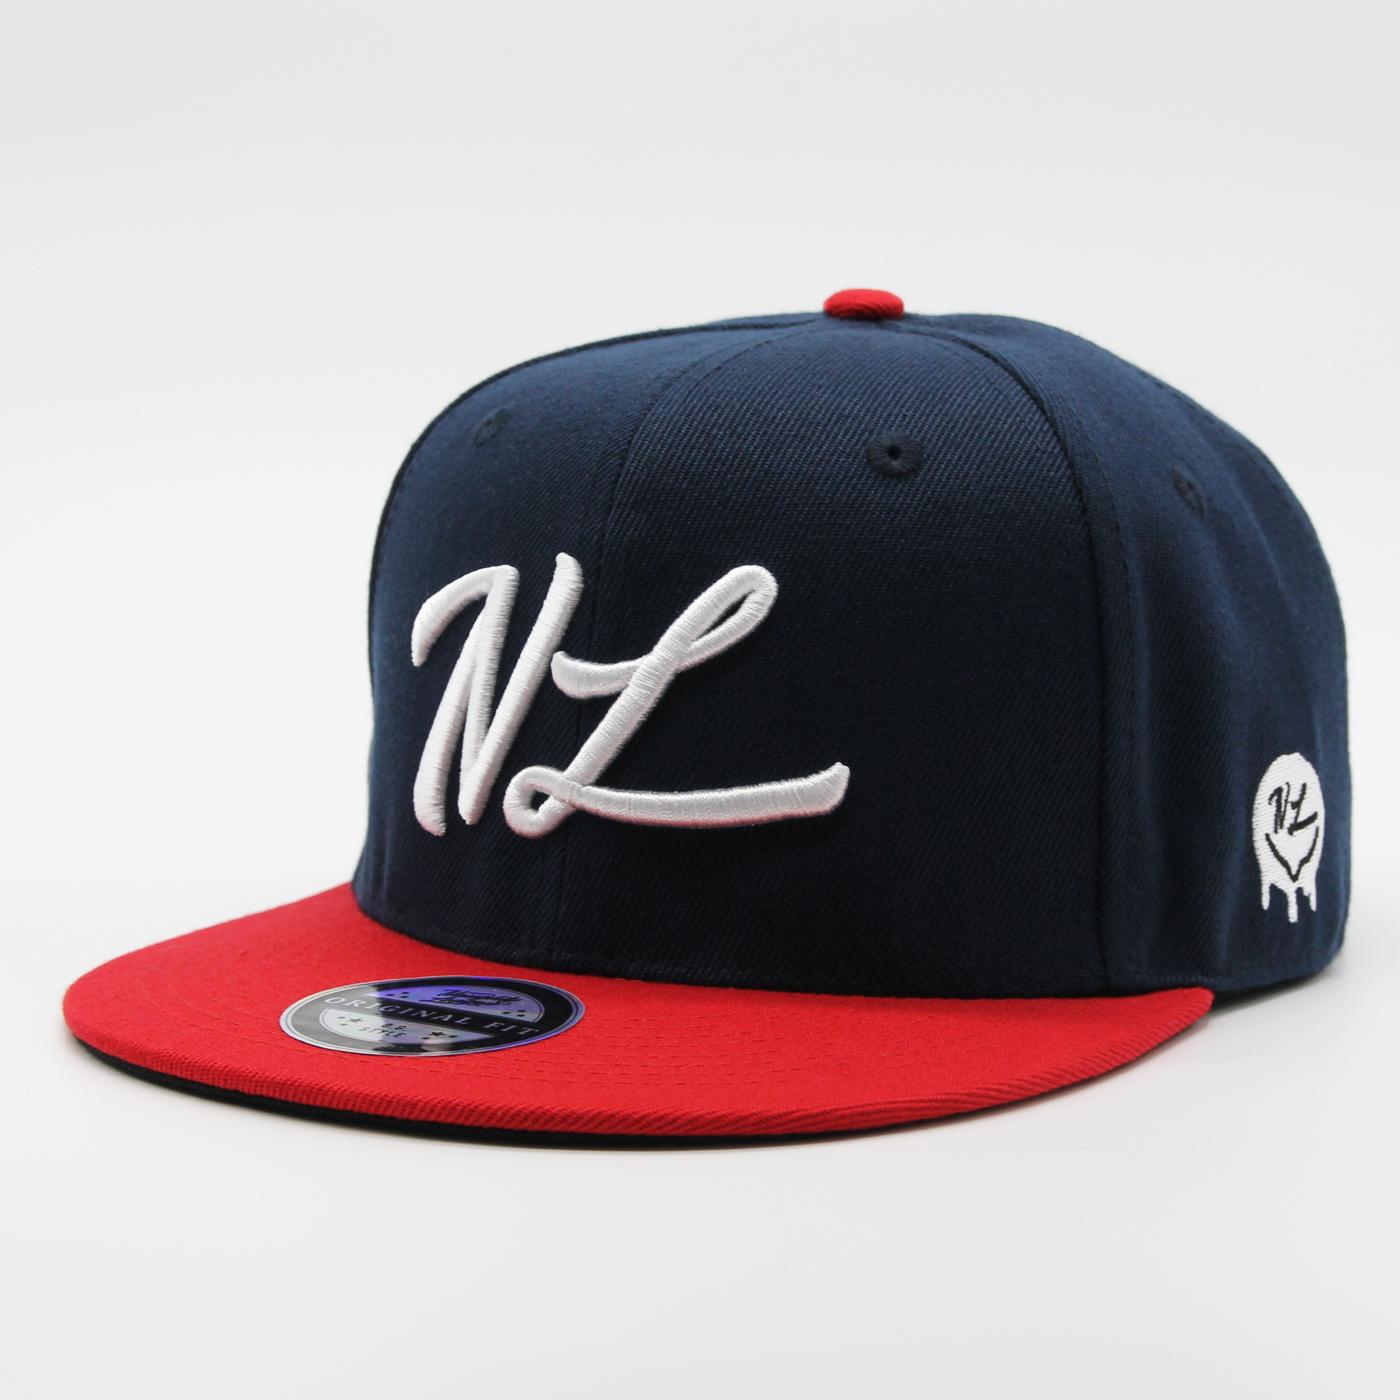 Naughty League Icon Basic Fitted navy/red/white